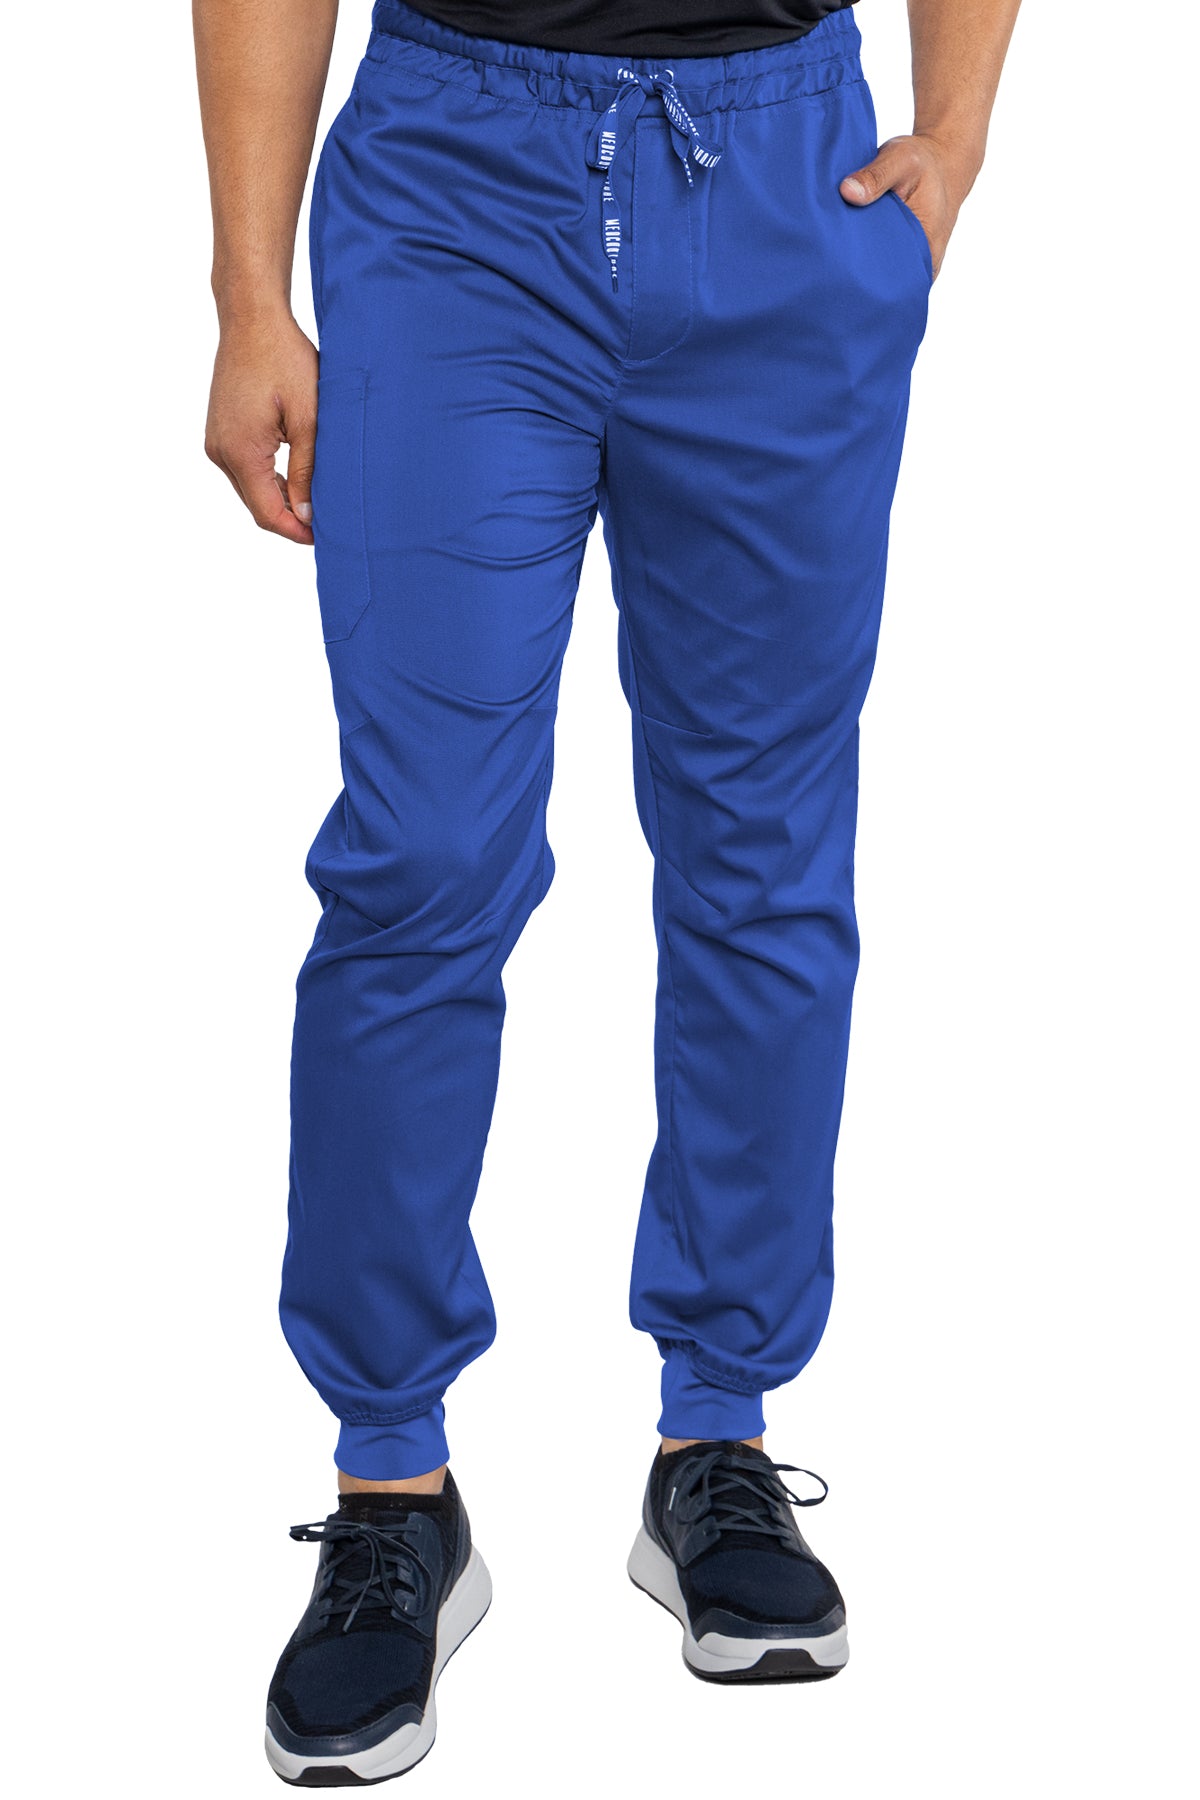 MED COUTURE Bowen Jogger Pant | 7777 - Butterfly Touch Scrubs